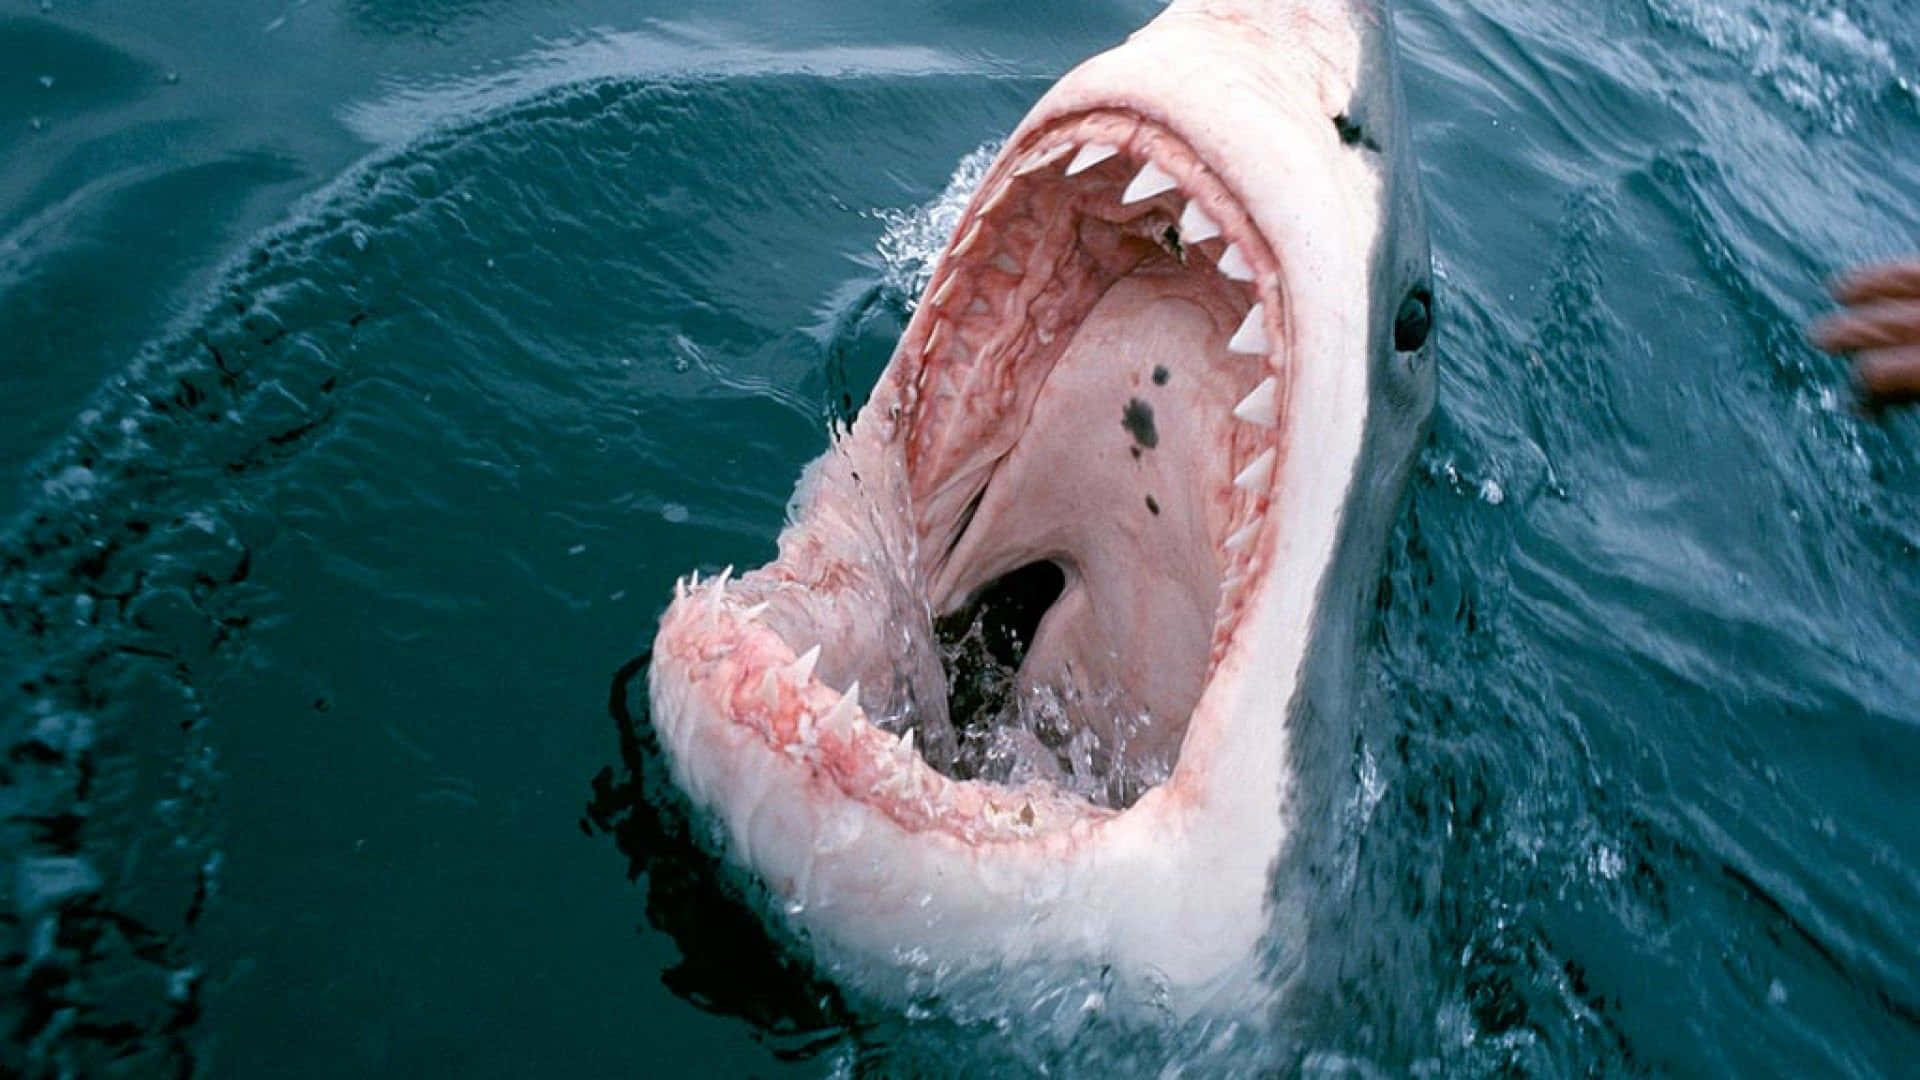 A White Shark With Its Mouth Open